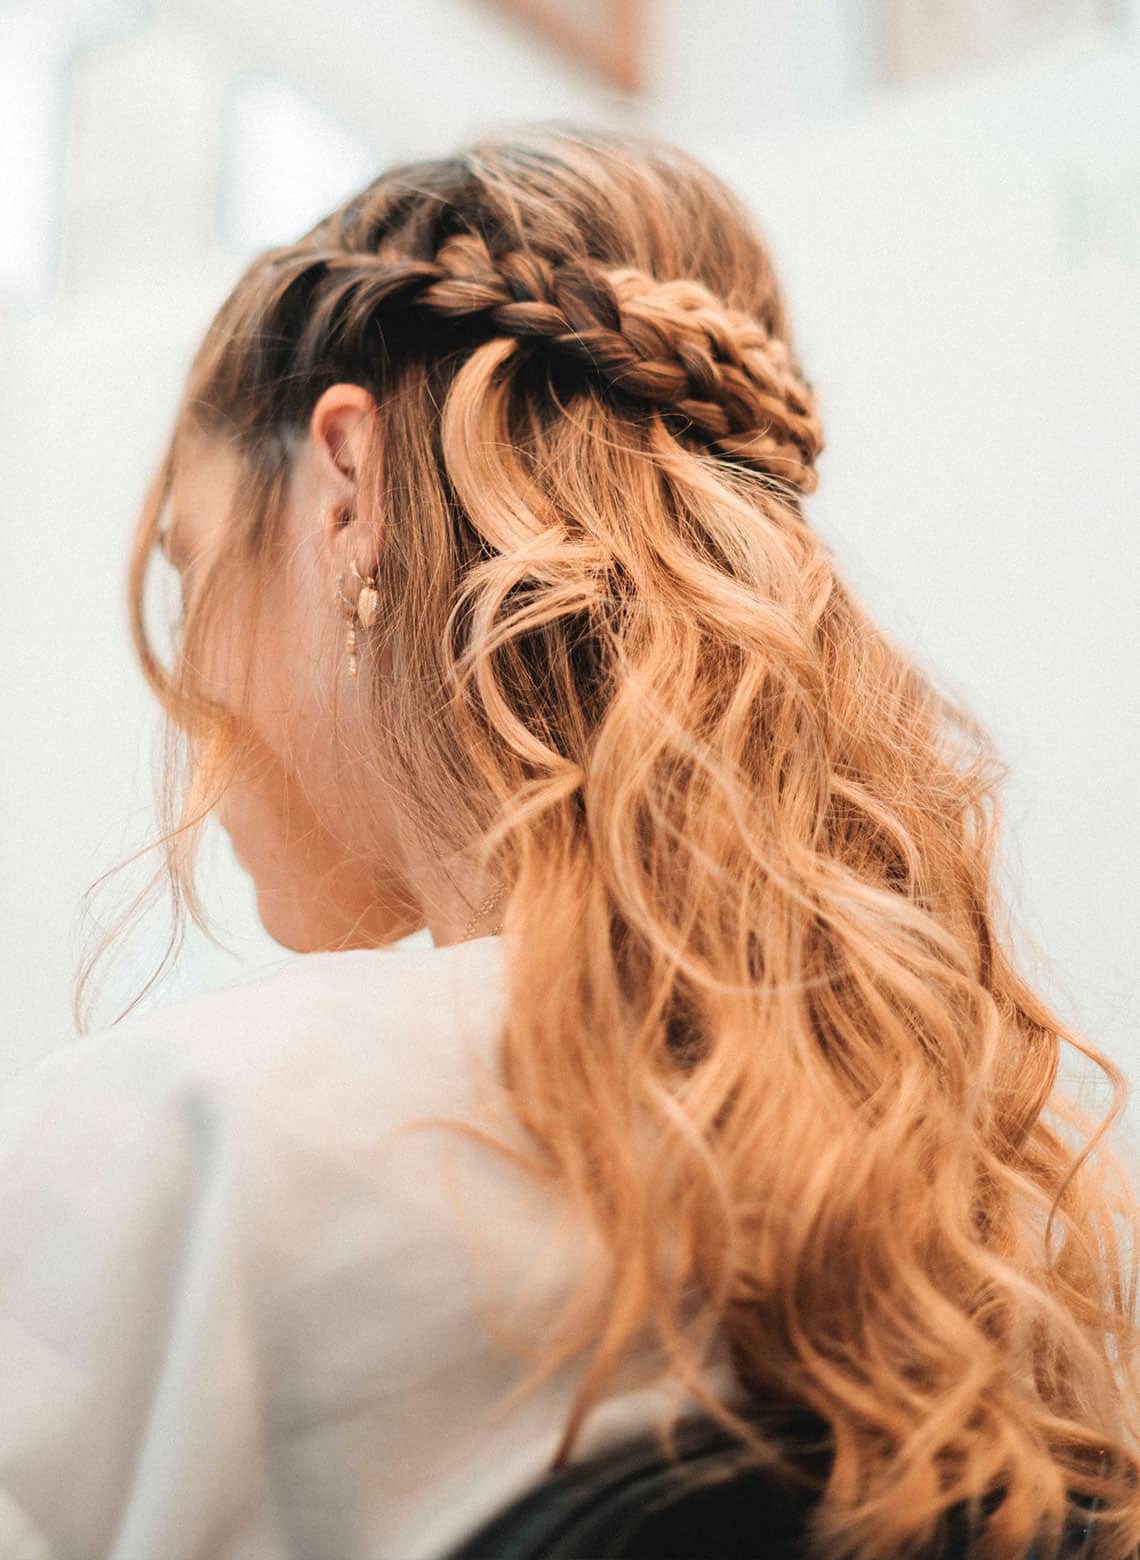 24 Braided Hairstyles for Curls of all Kinds - StyleSeat